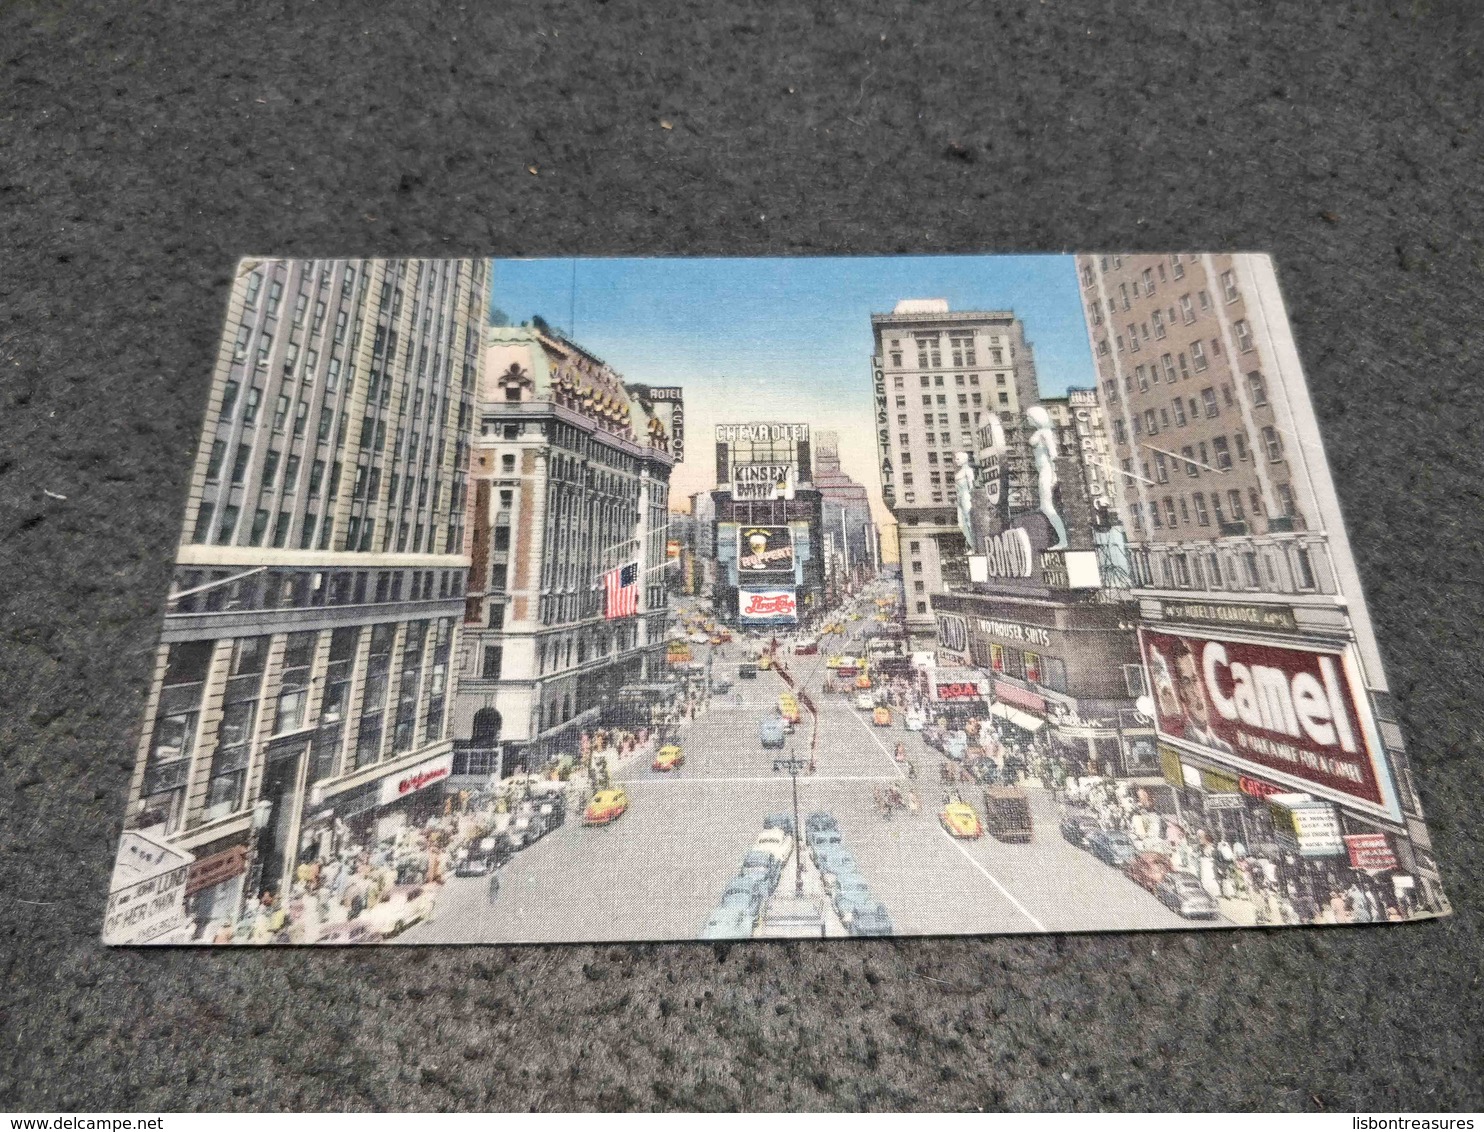 ANTIQUE POSTCARD UNITED STATES N.Y. TIMES SQUARE NEW YORK USED NOT CIRCULATED 1954 - Time Square